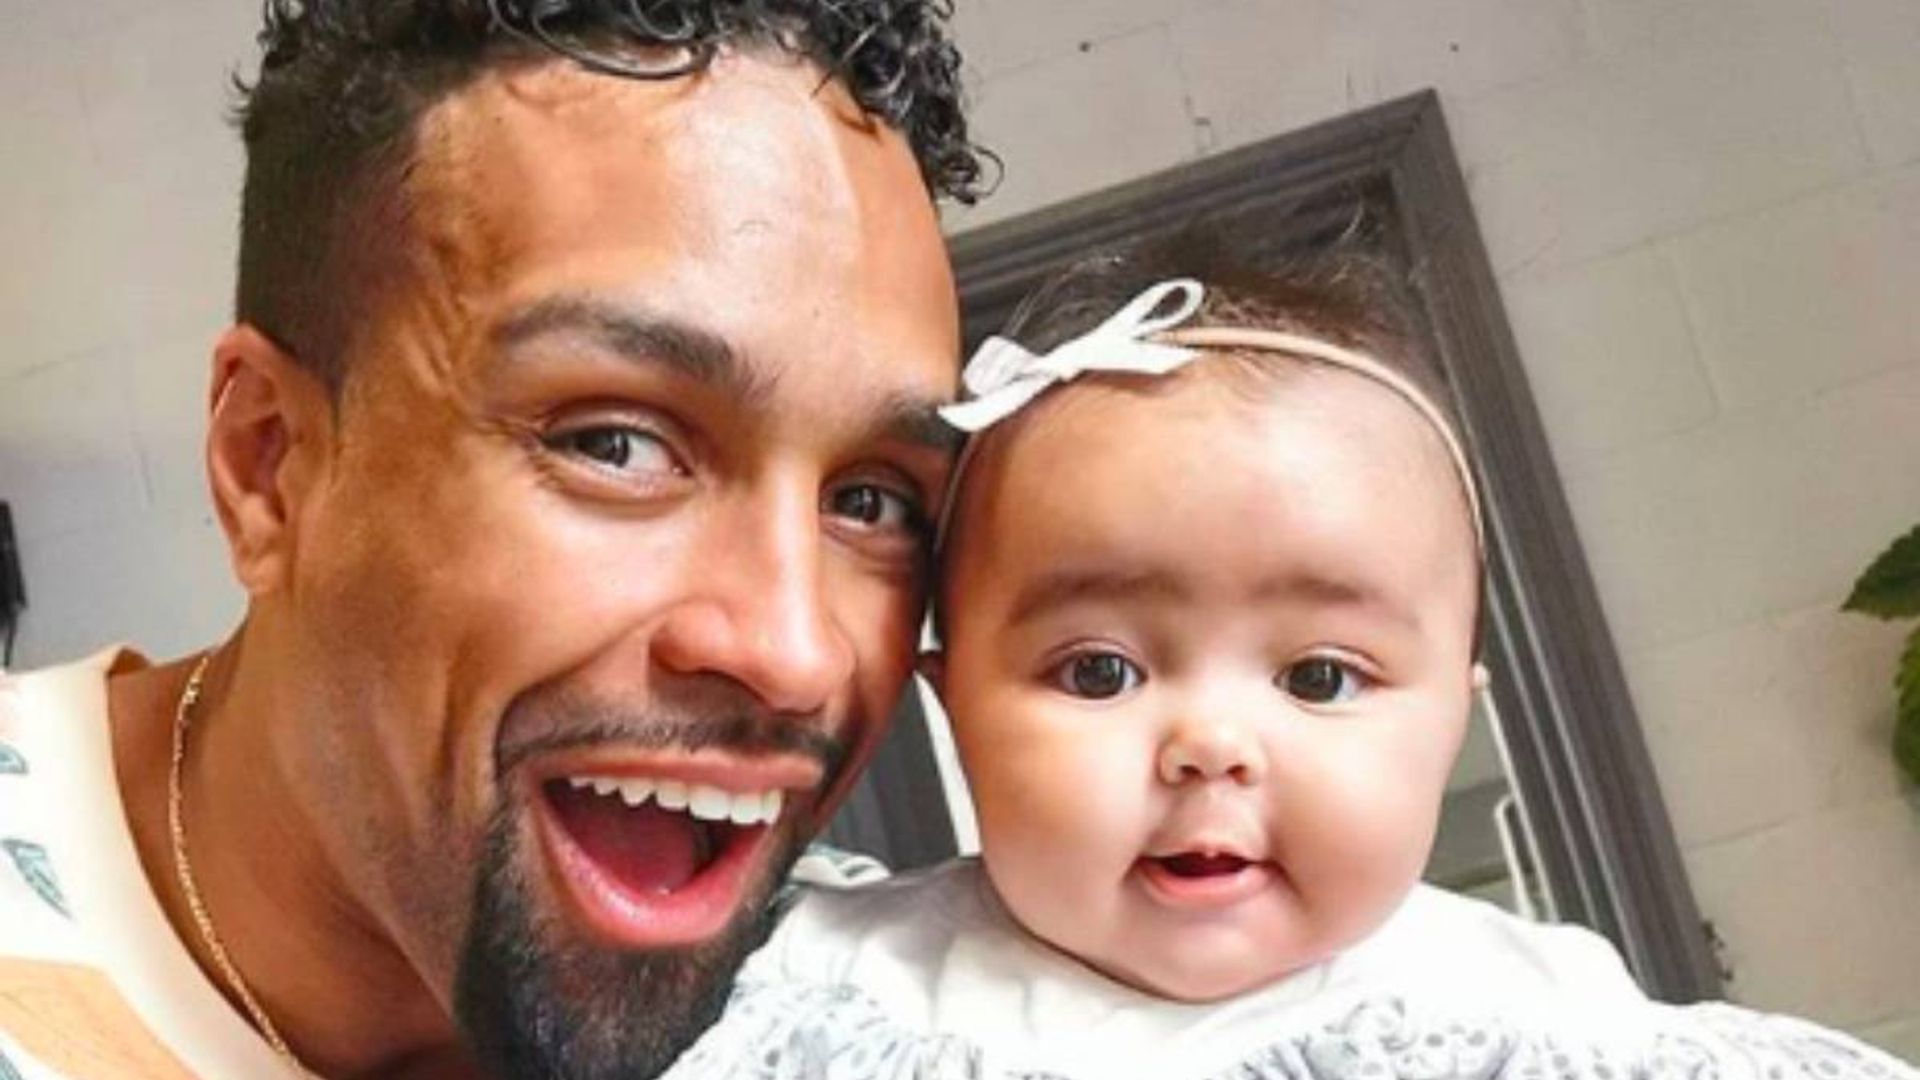 BGT judge Ashley Banjo shares rare video of daughter Rose - and it's adorable